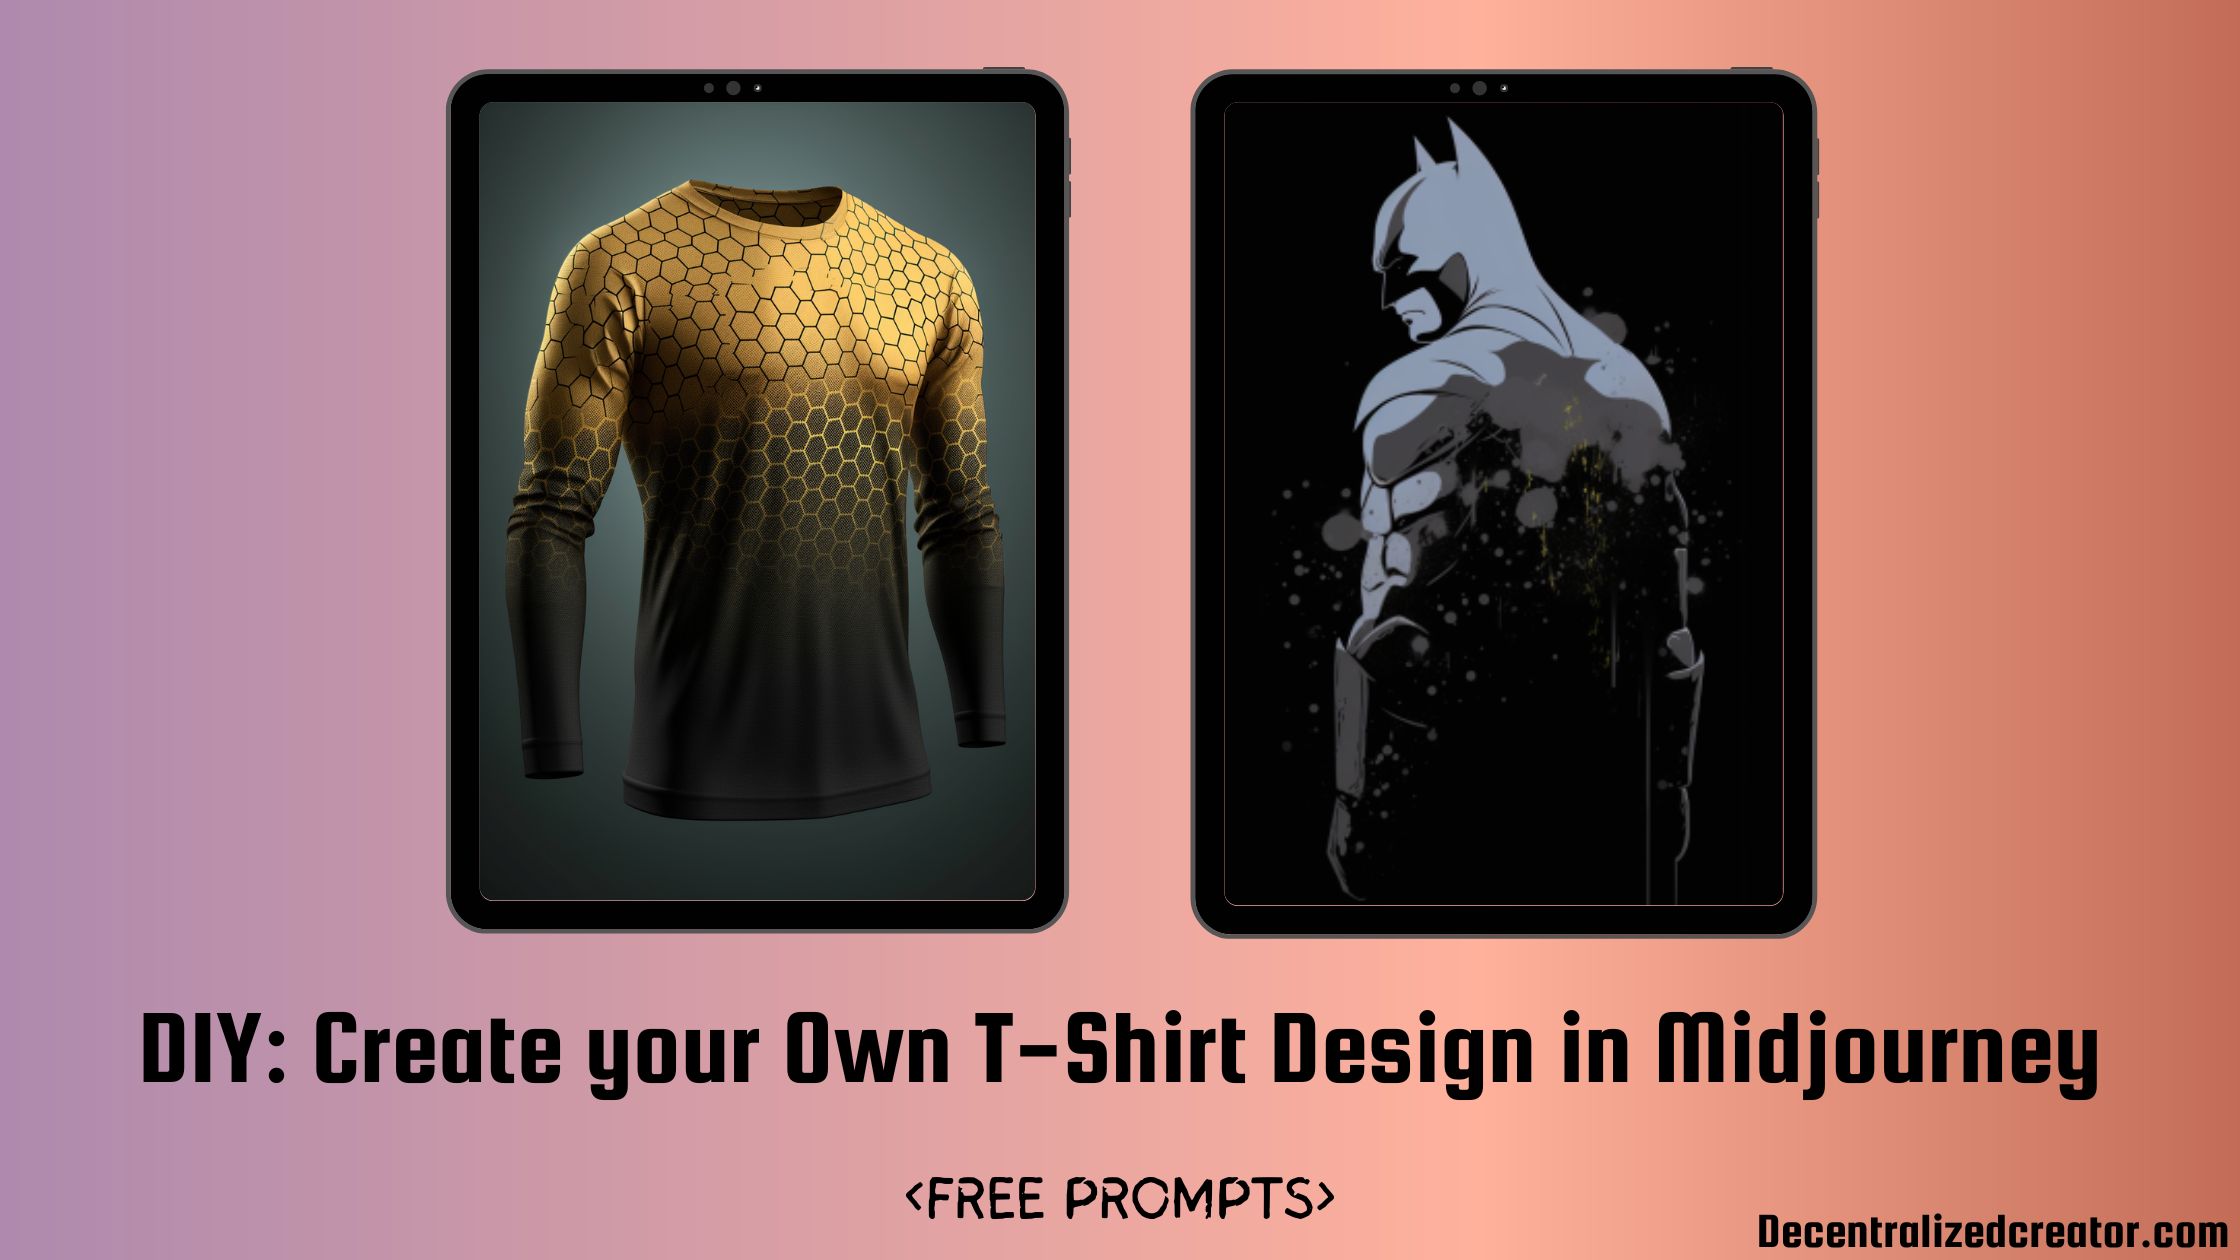 Create your Own T-Shirt Design in Midjourney